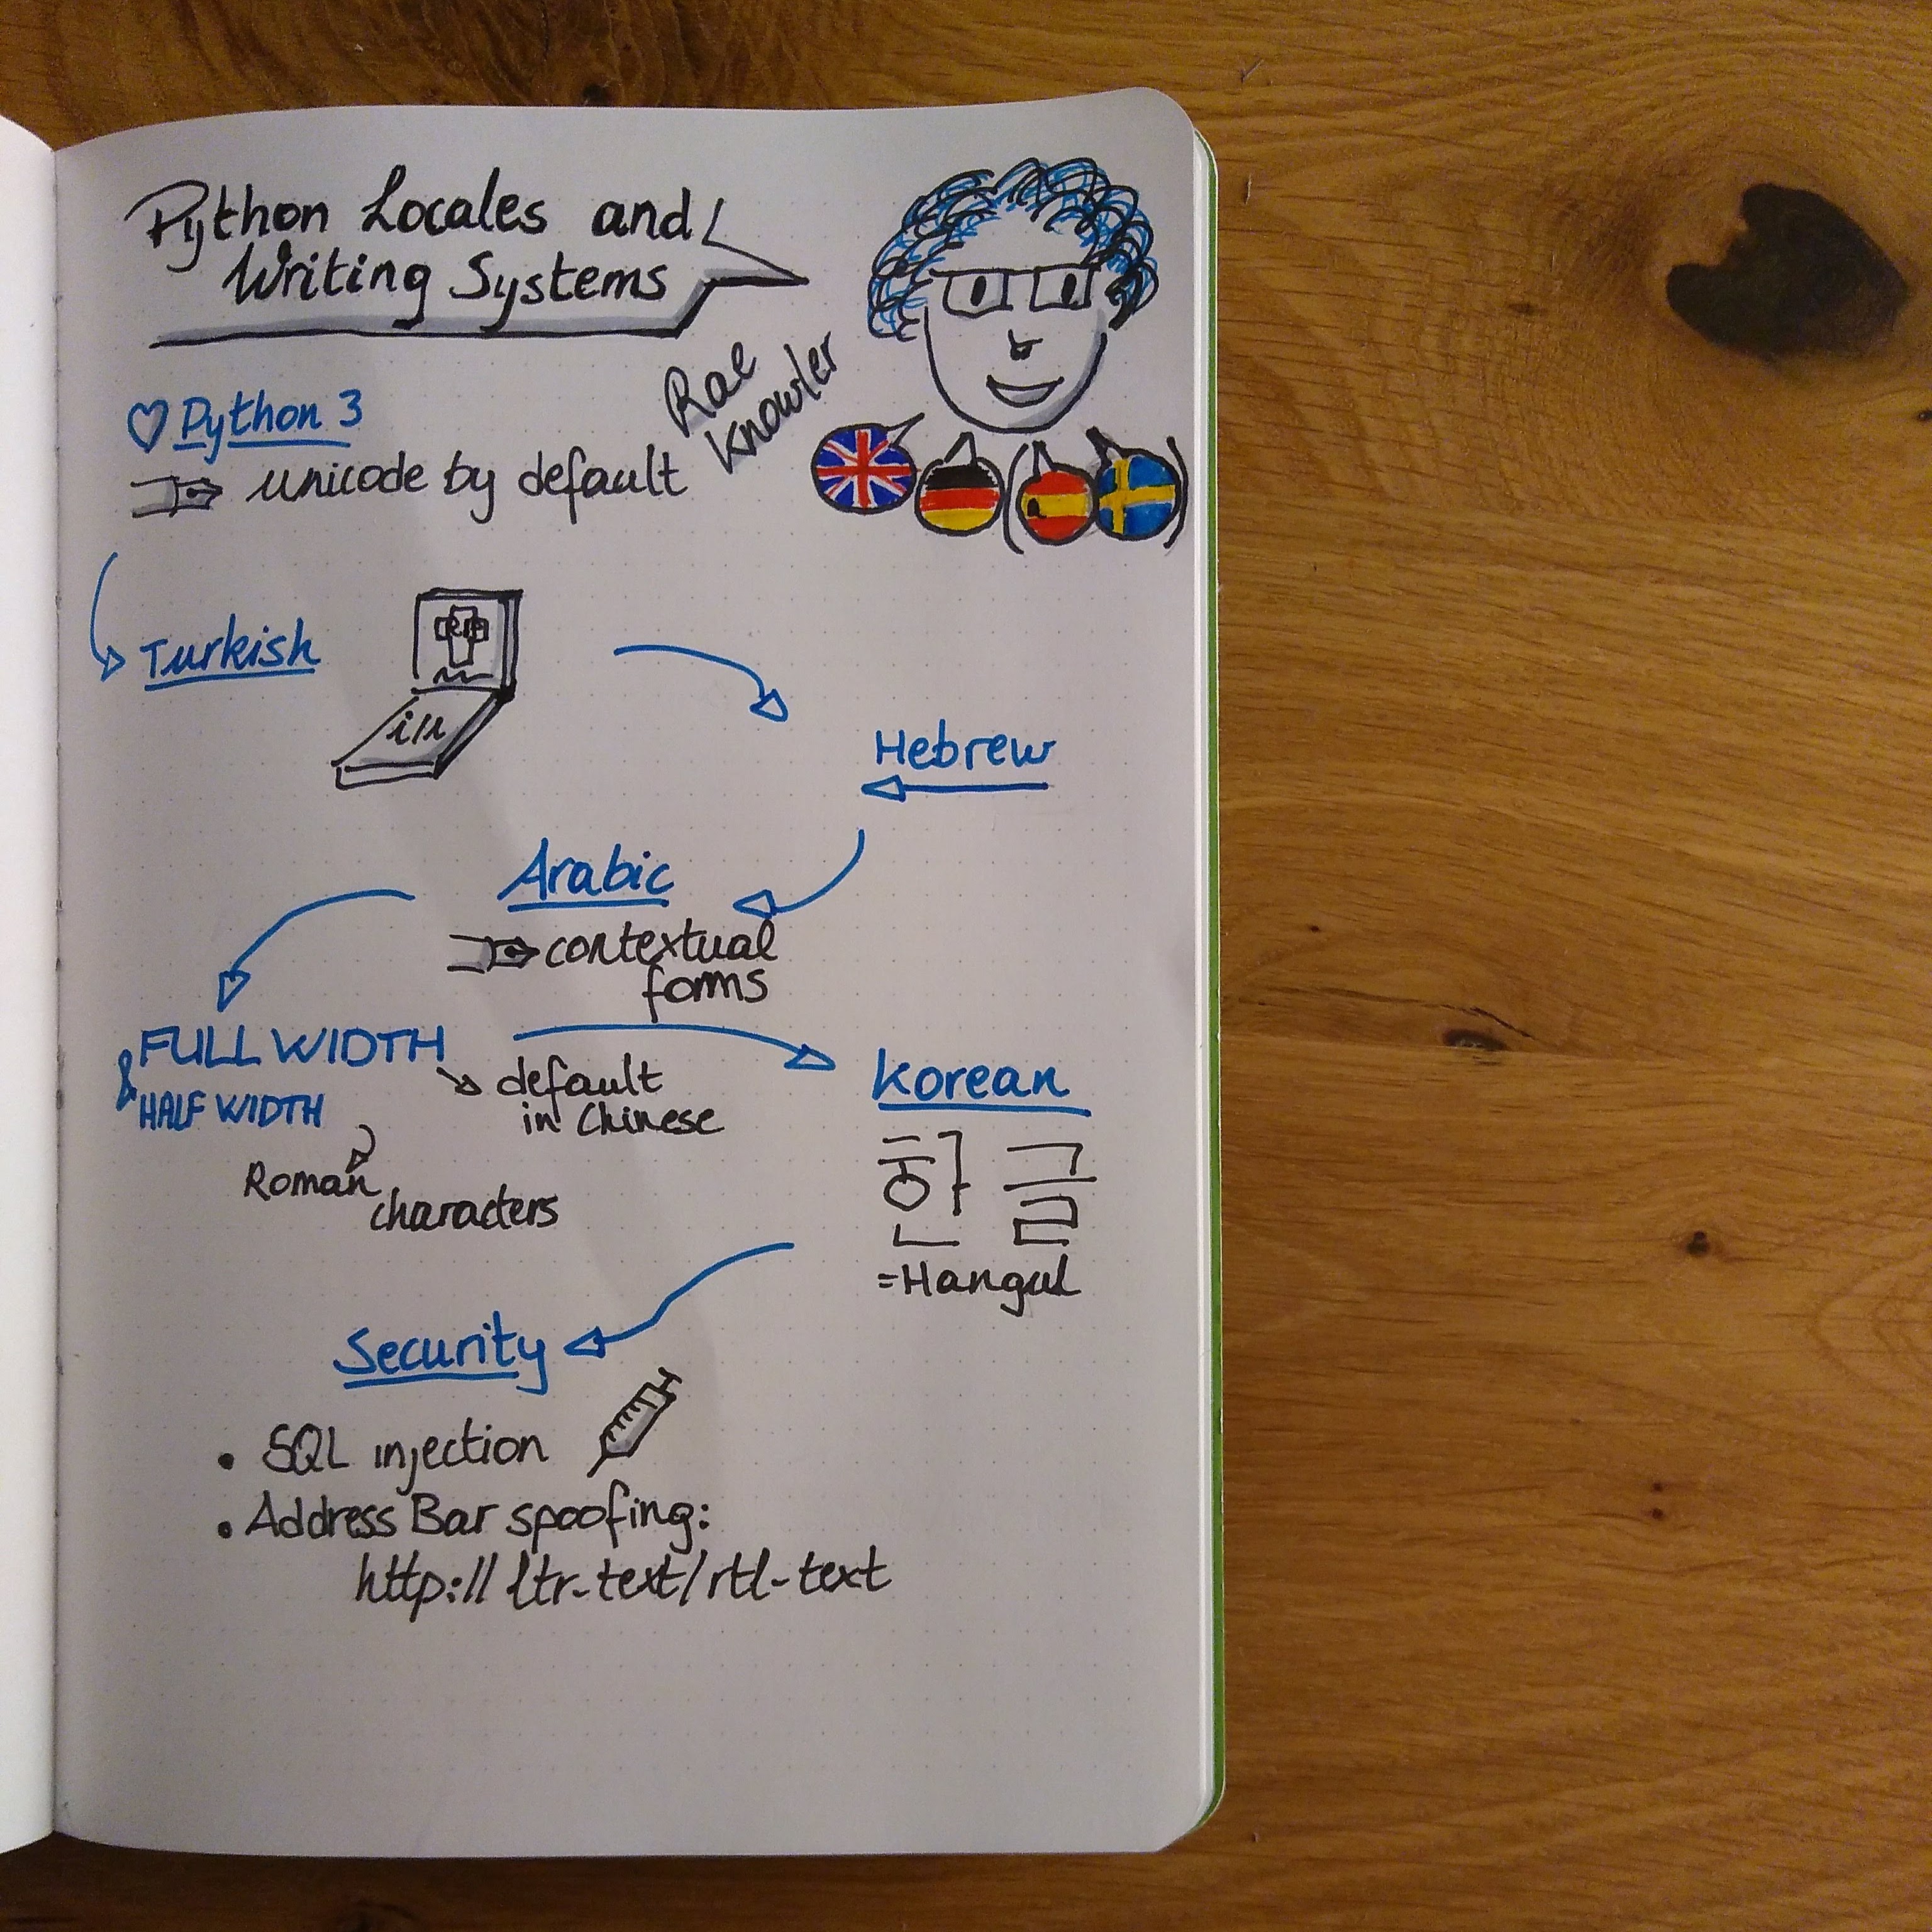 Sketchnote of Python, Locales and Writing Systems